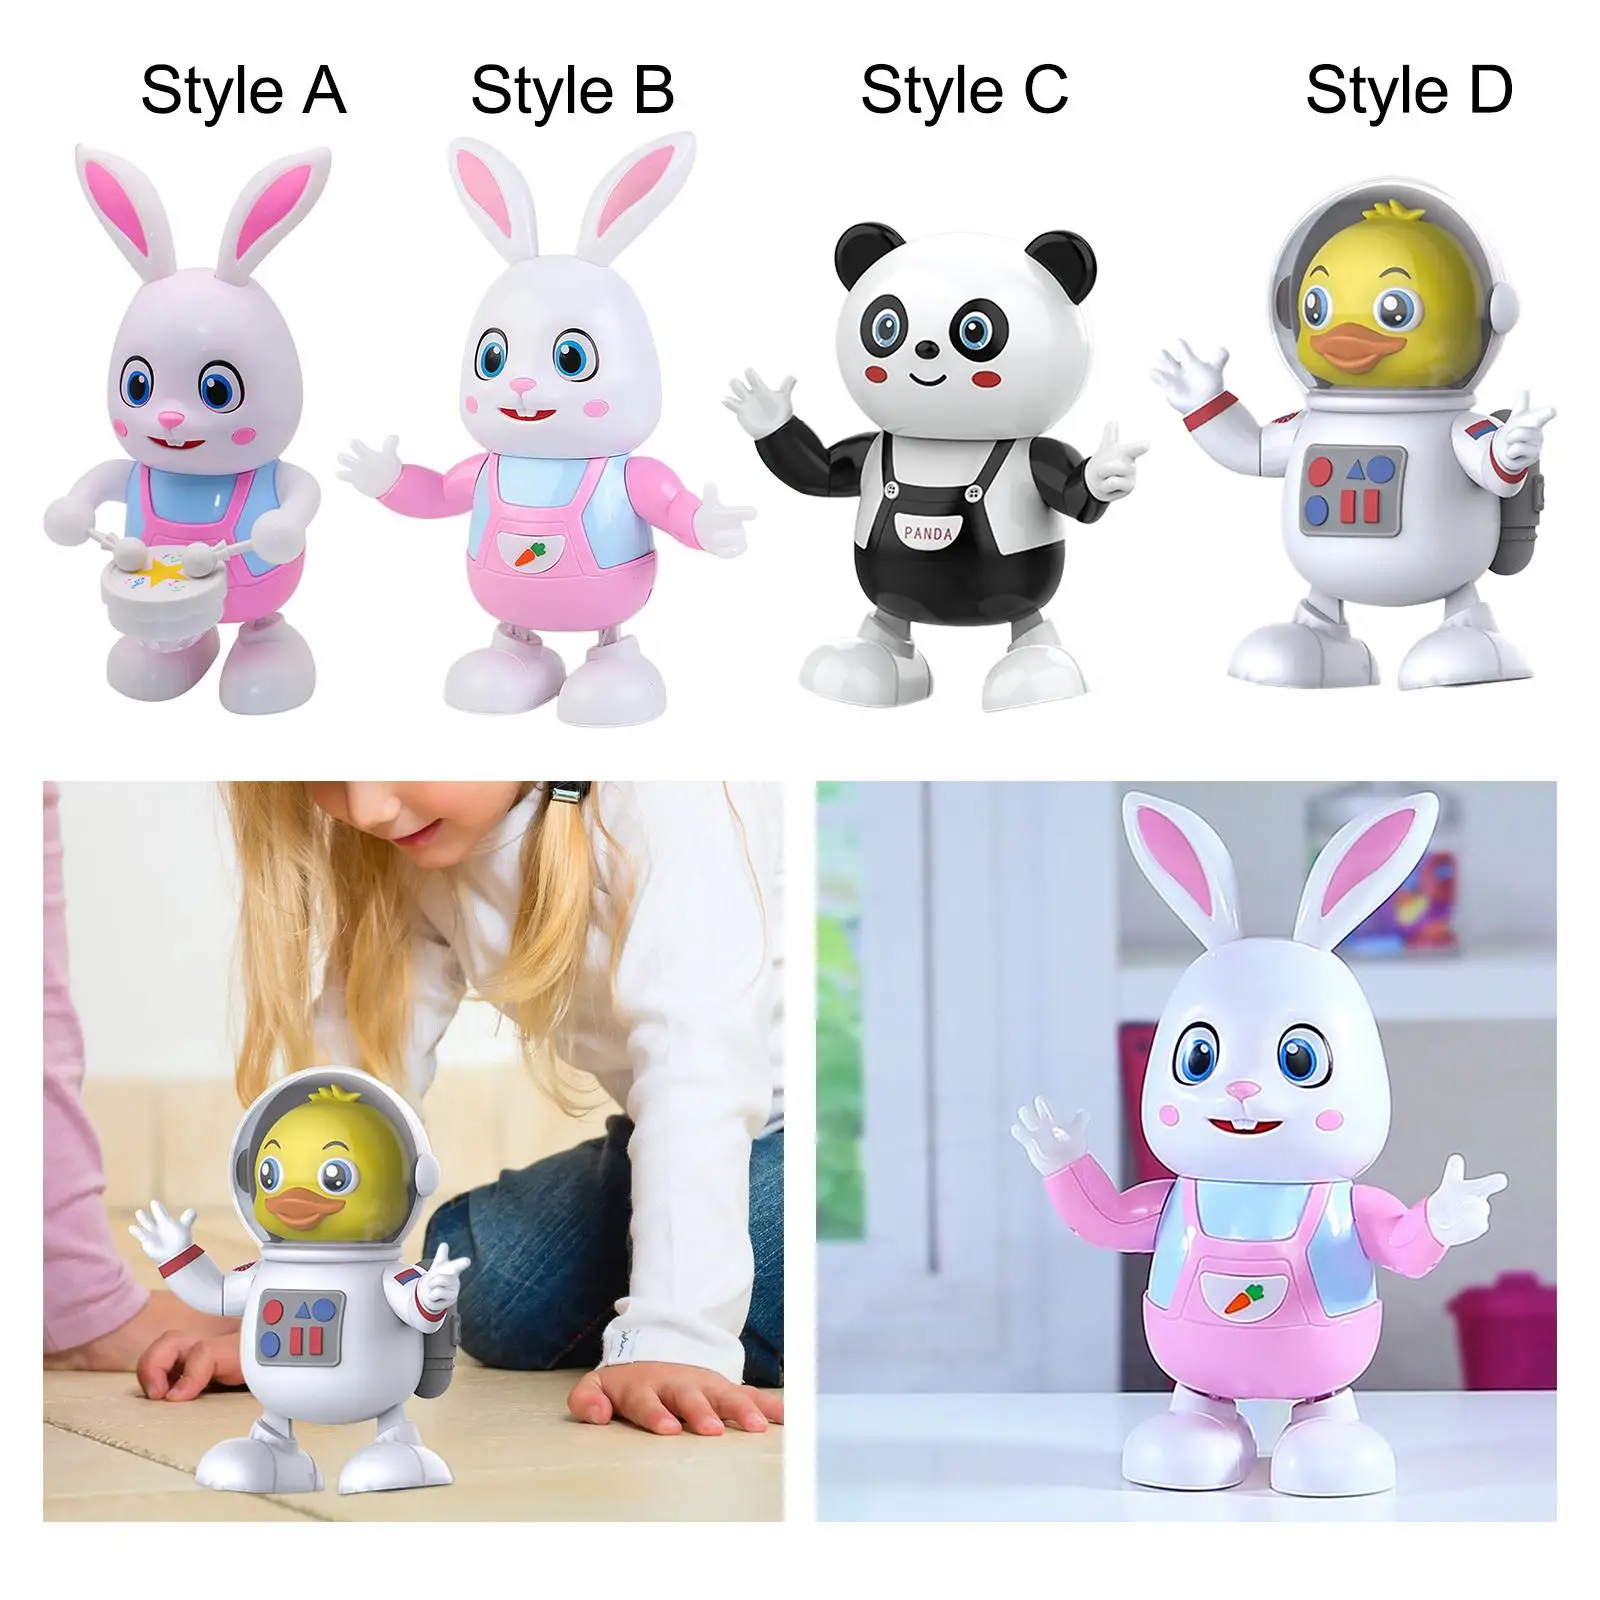 Lighting Music Toy Baby Dancing Toy Baby Toy with Music and Lights Baby Musical Toy for Toddlers Girls Children 3+ Year Old Kids